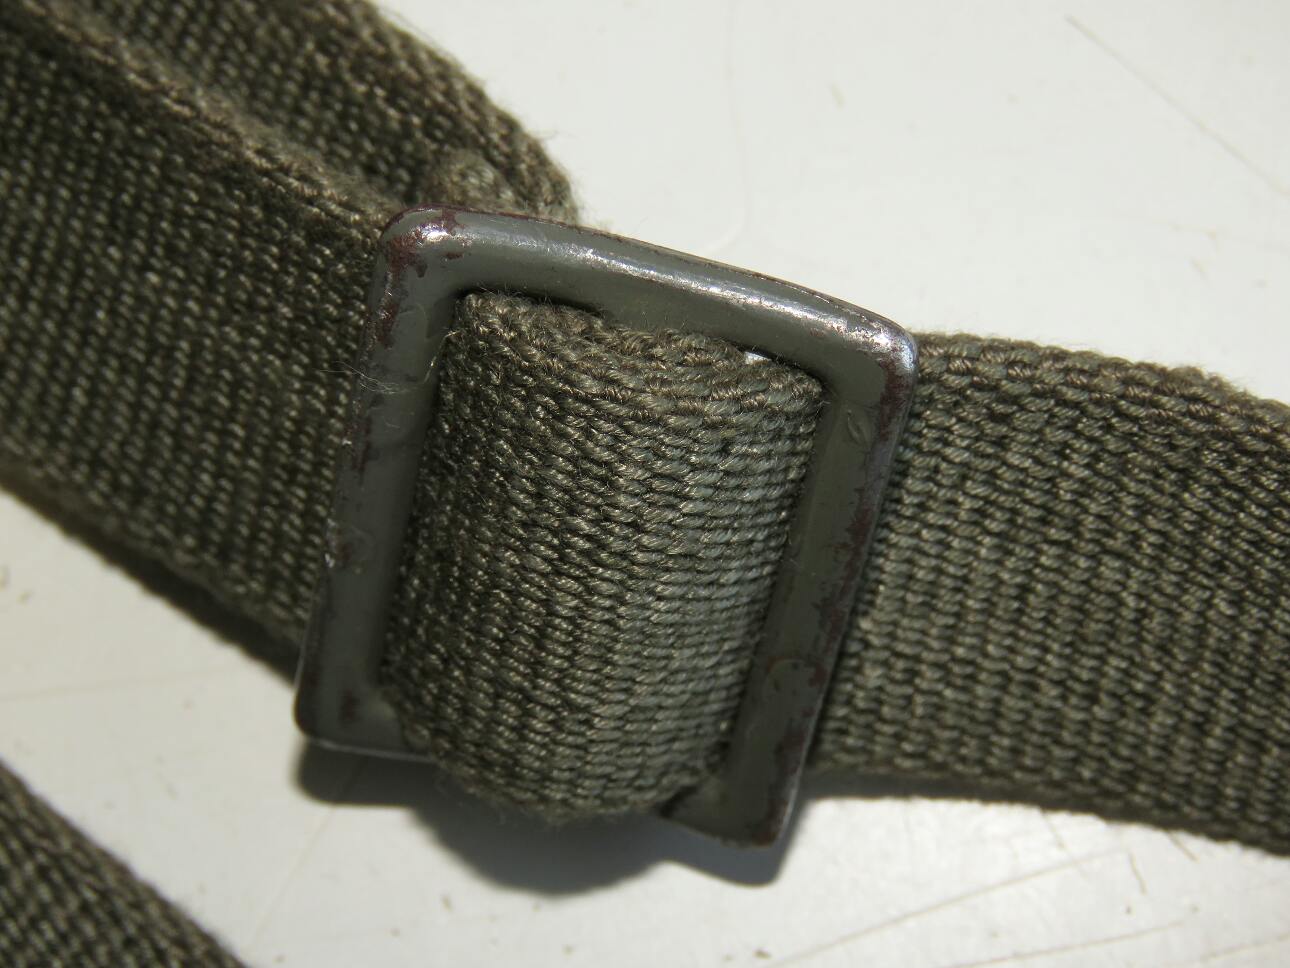 Webbing strap for the German Flare pistol holster or its ammo bag